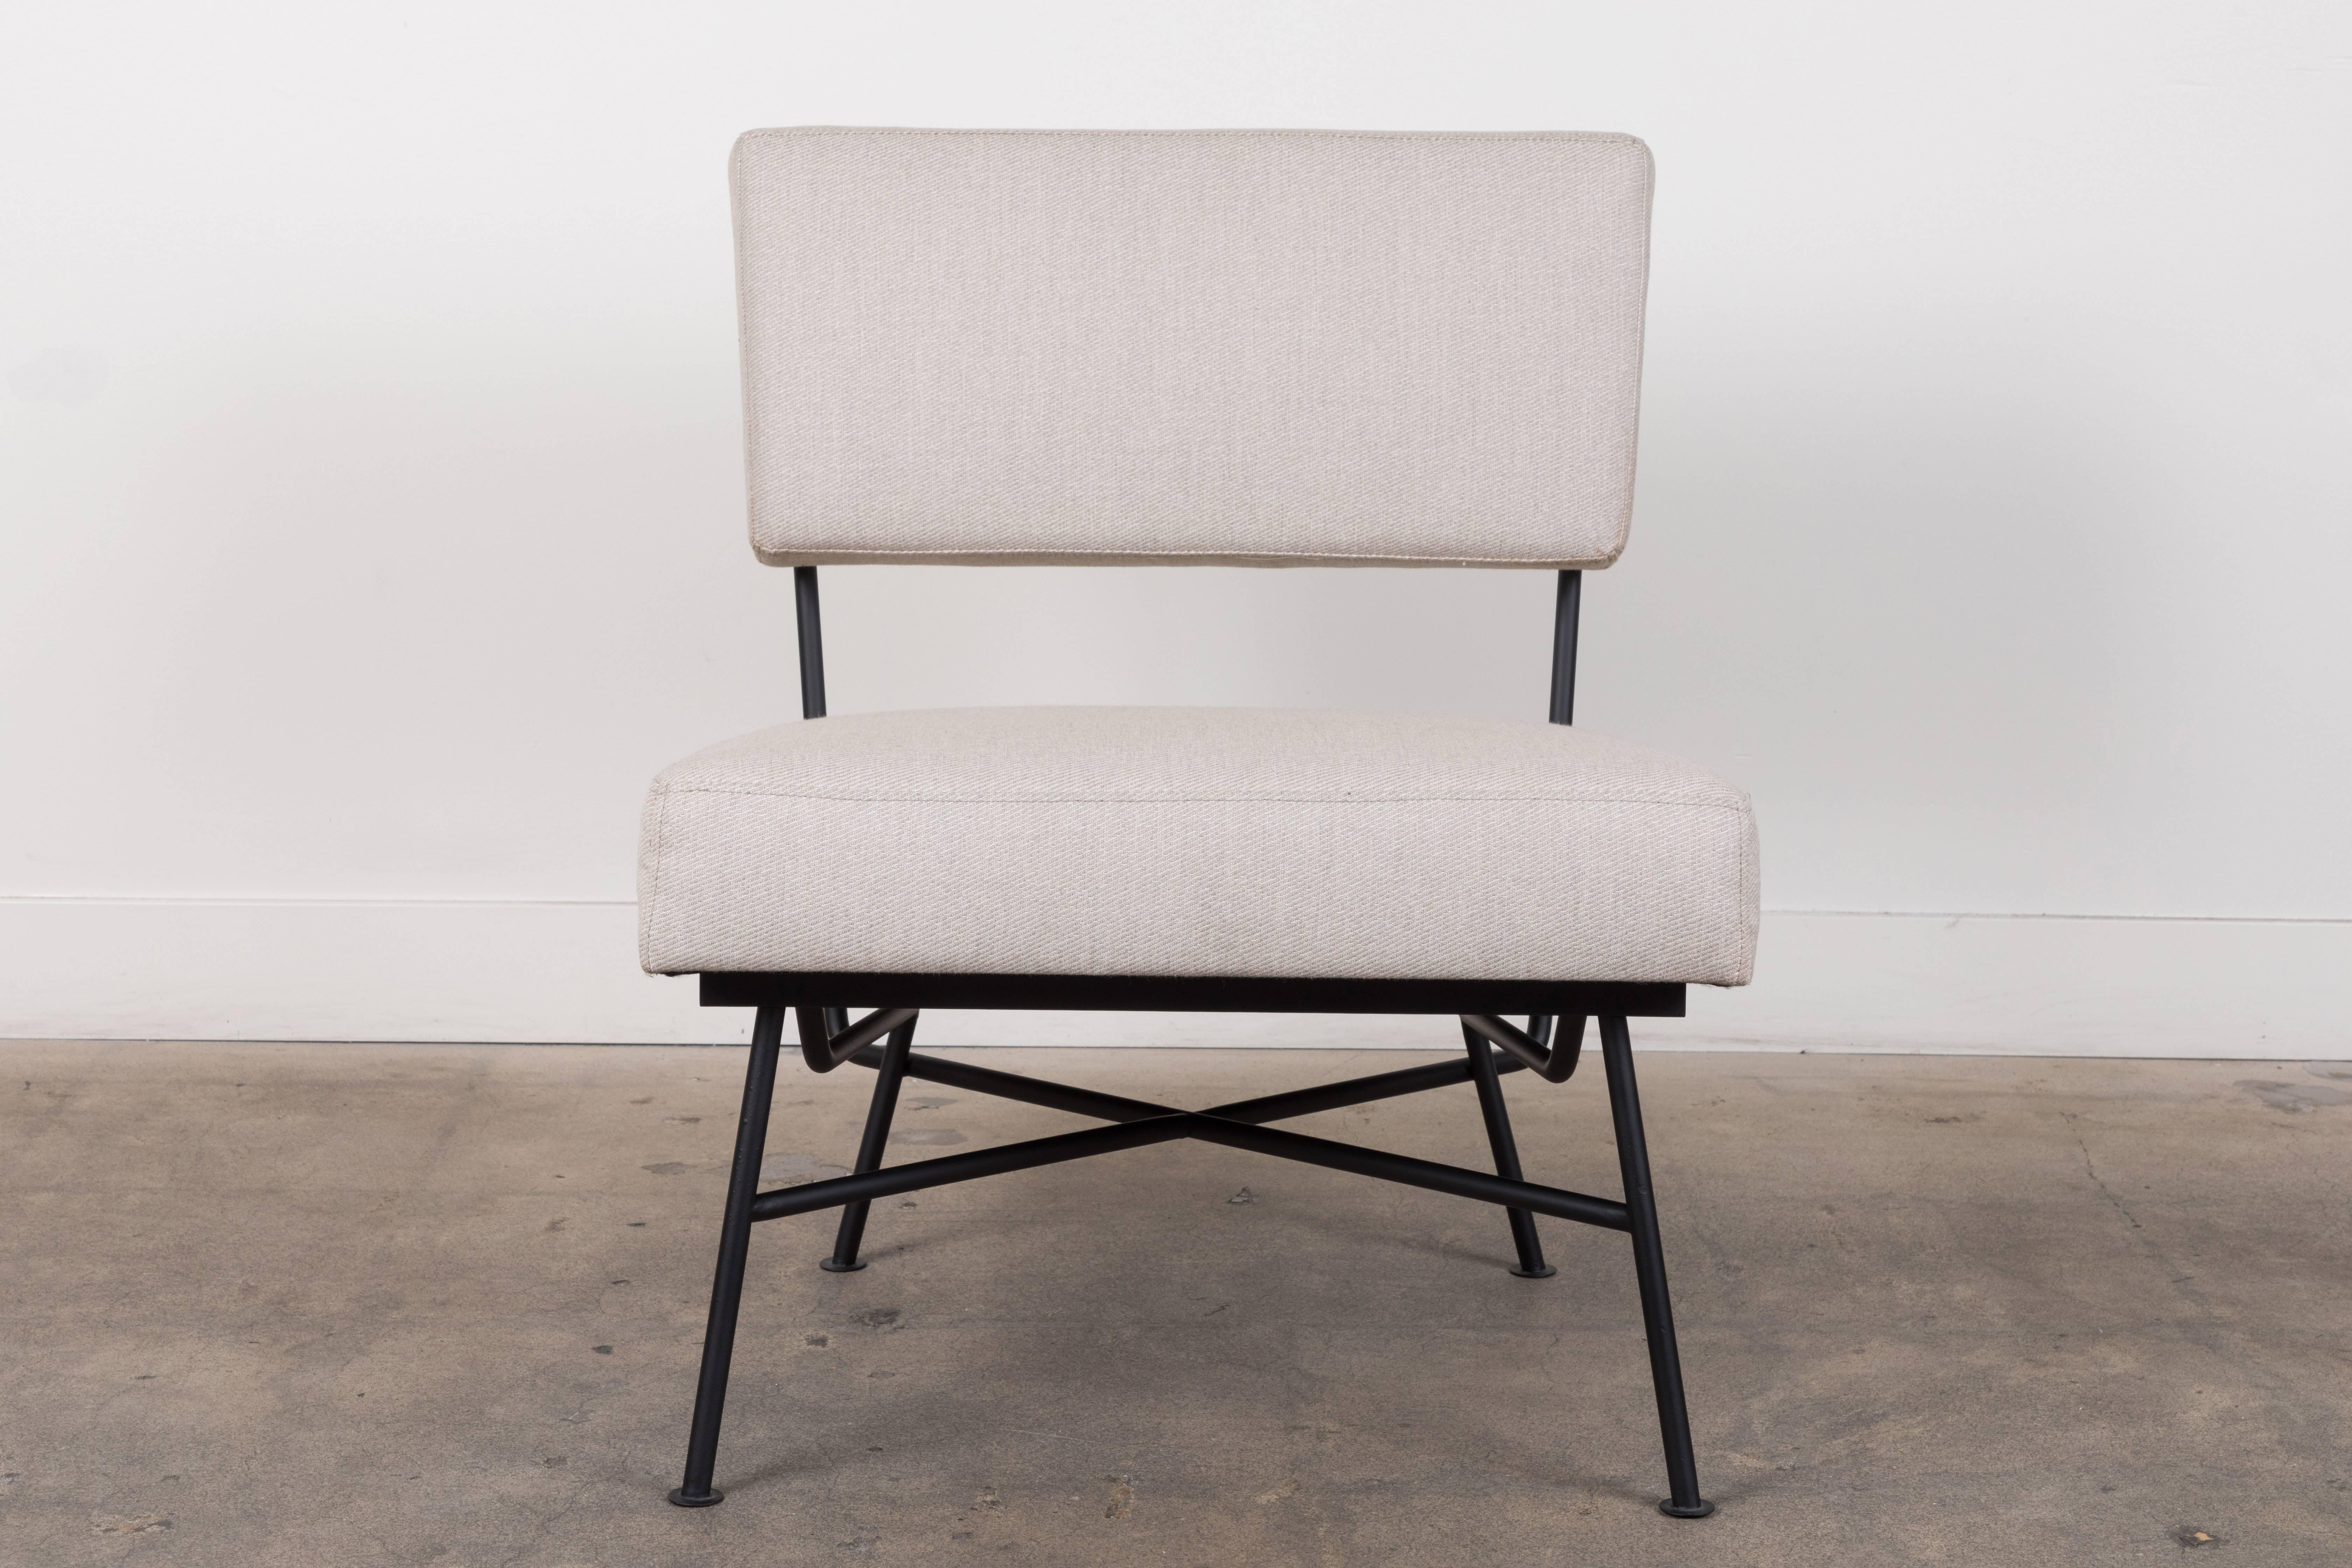 The Montrose Chair features a powdercoated steel frame and attached cushions that is suitable for indoor or outdoor use. The Montrose Ottoman is available separately to match. For indoor or outdoor use, but not intended for use in wet